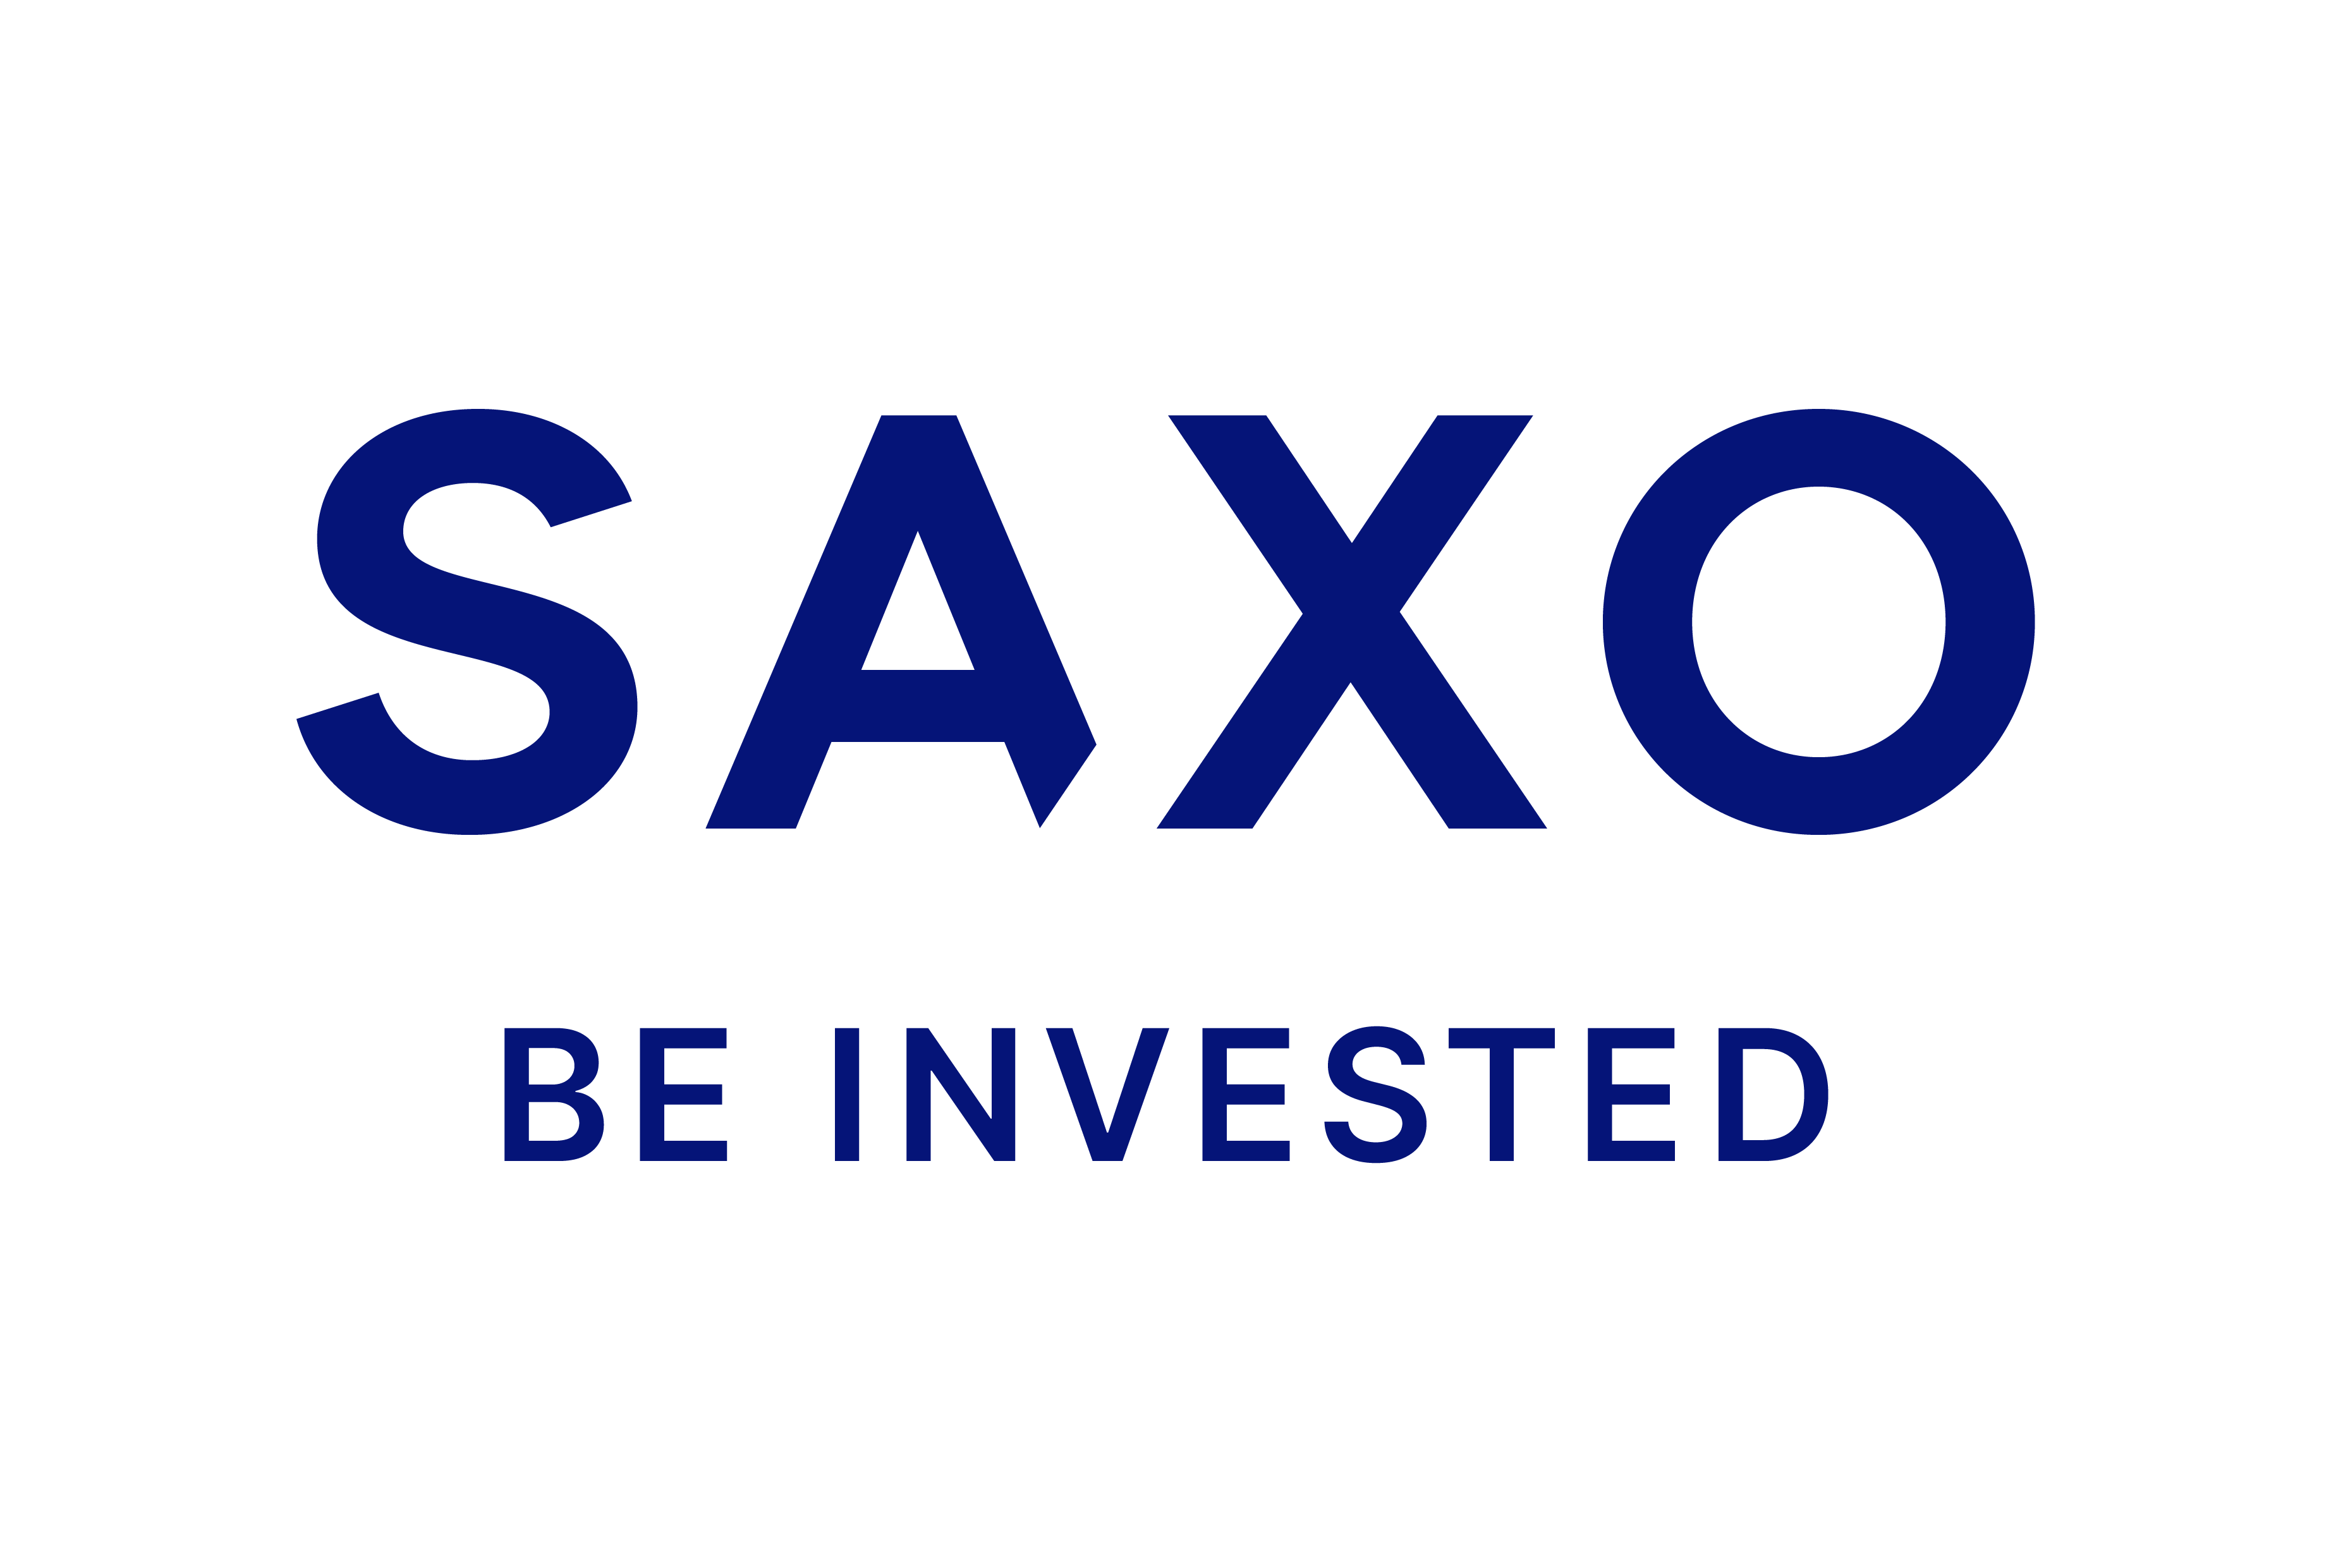 Saxo: Be Invested